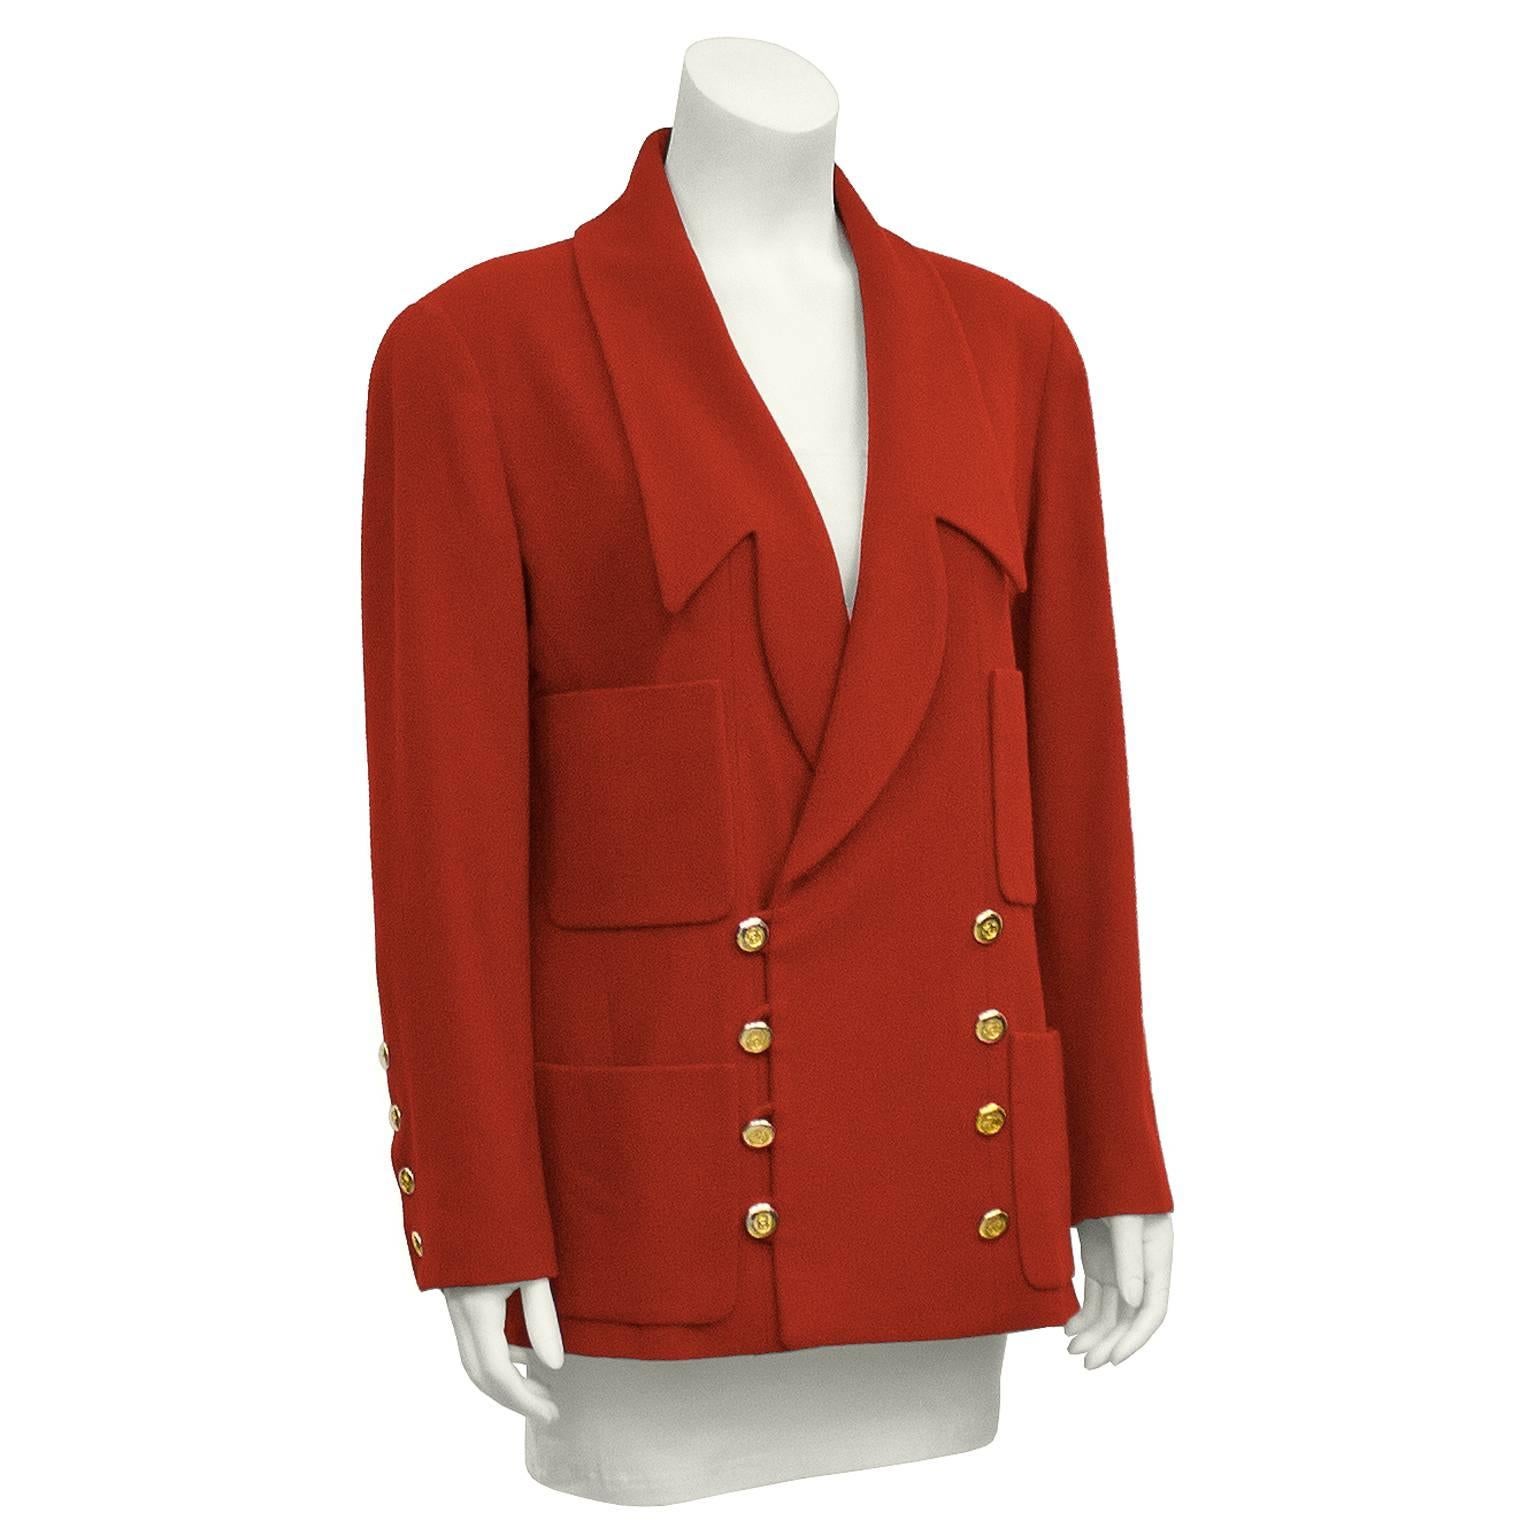 Amazing Chanel red cashmere blazer from the 1980s. Features uniquely cut lapels, two vertically aligned patch pockets on each side. Double breasted, with gold buttons embossed with CC logo on them. Four buttons on each sleeve. Excellent vintage